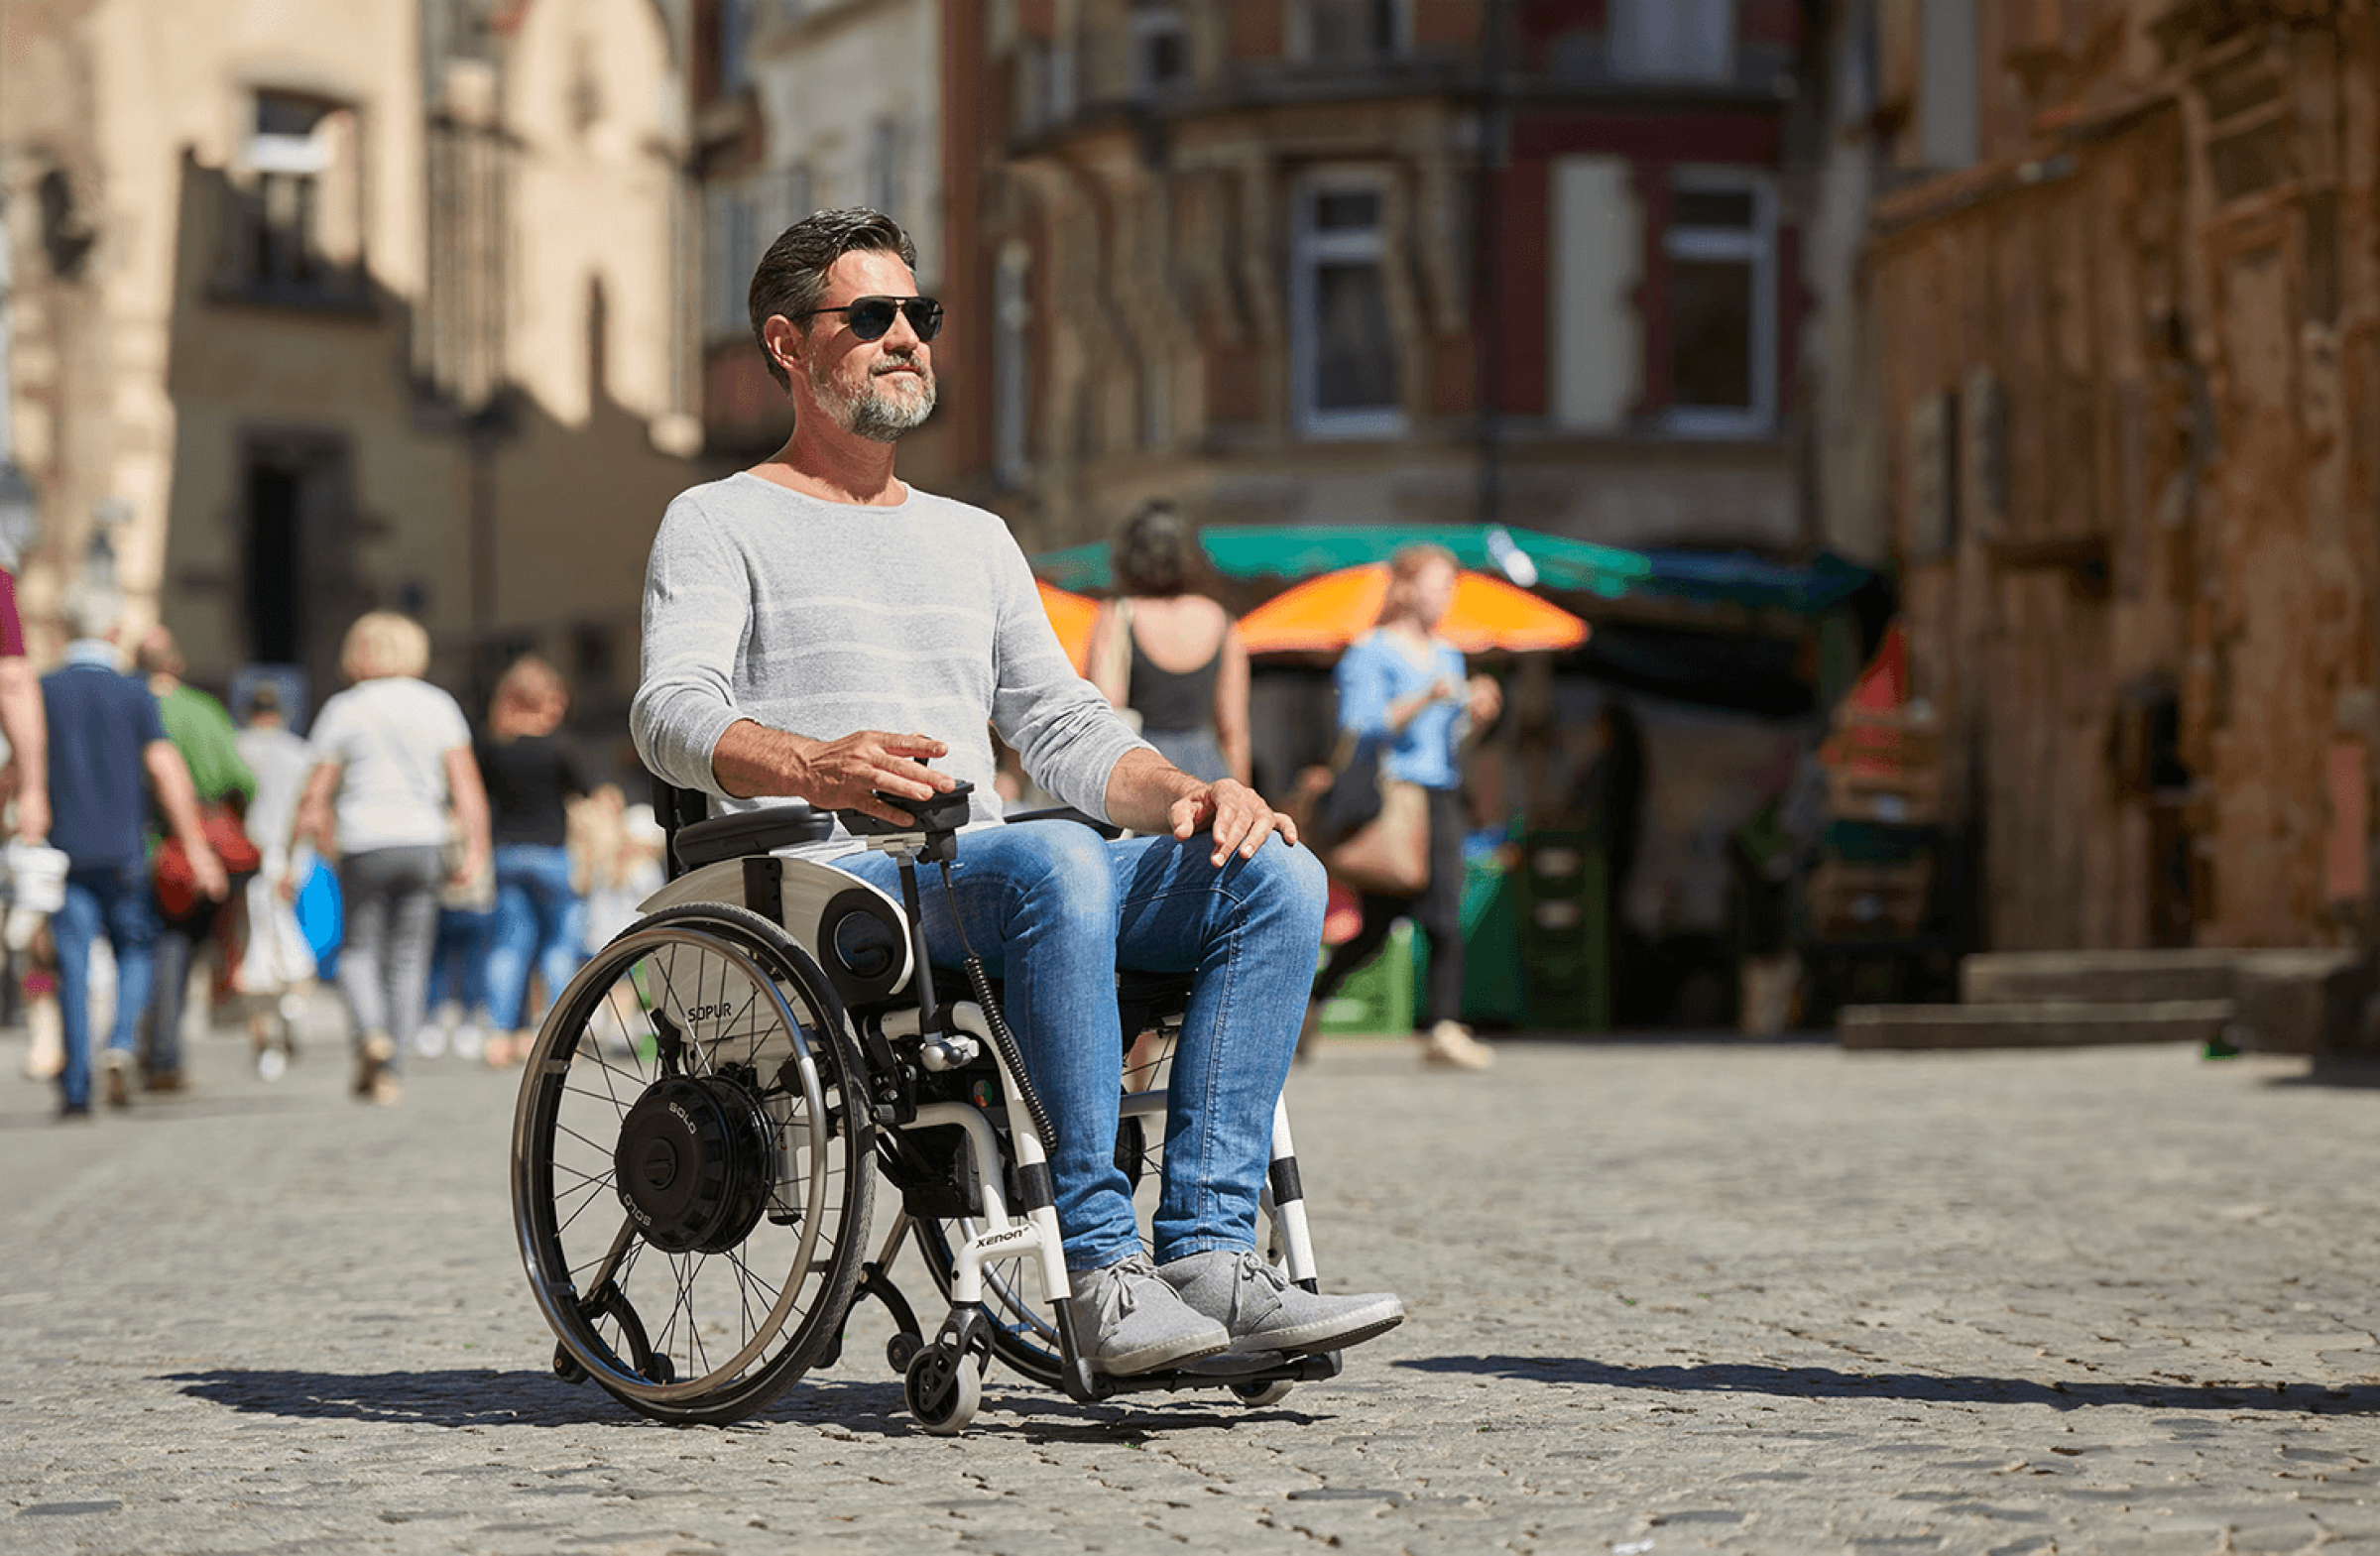 The picture shows a middle-aged man, wearing sunglasses, driving through a pedestrian zone on a summer day in his wheelchair with an auxiliary drive for self-propelled driving. The add-on drive is black and installed in the wheels as a wheel hub drive.